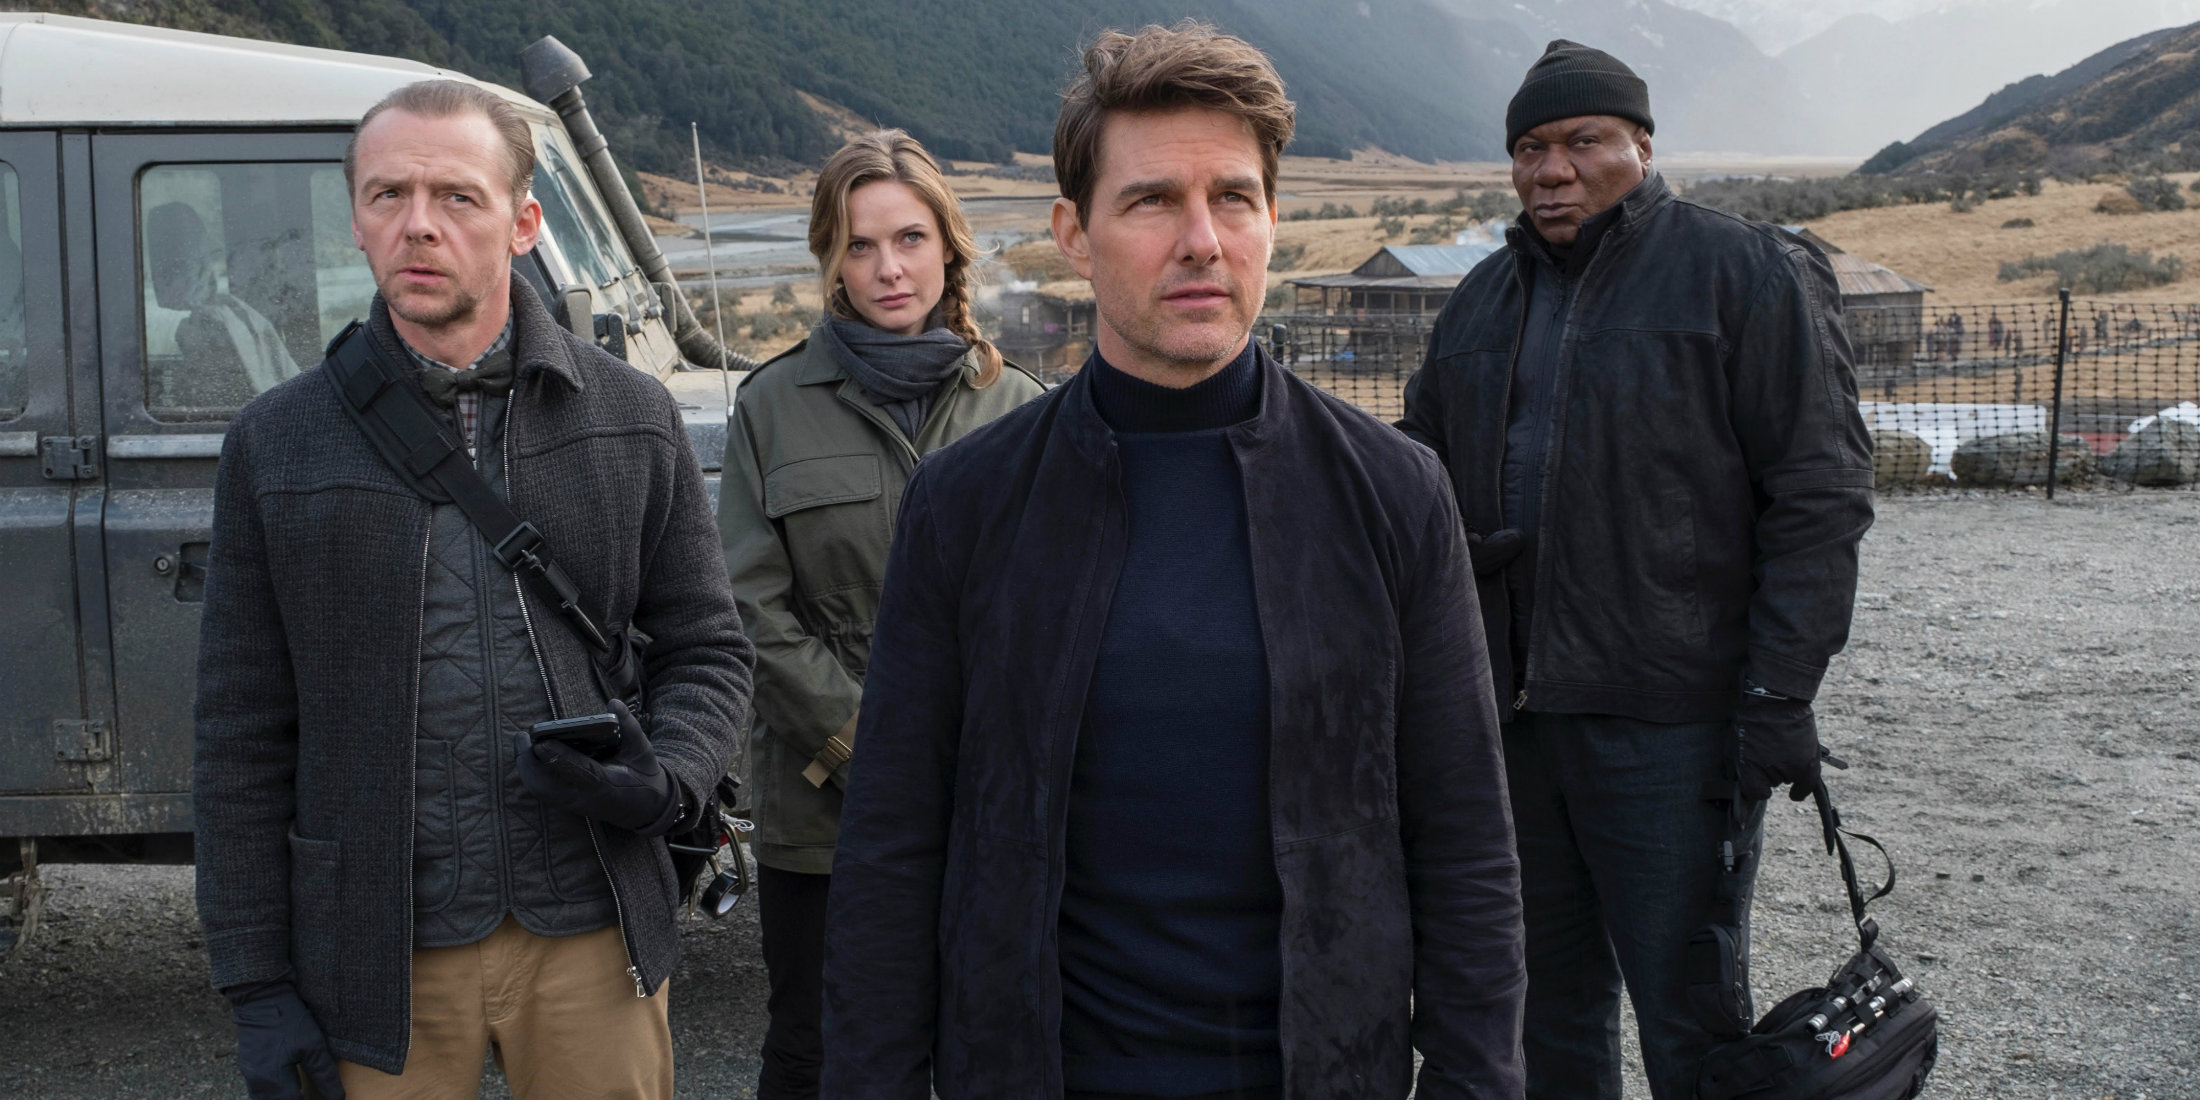 'Mission: Impossible - Fallout' Spoiler-Free Review